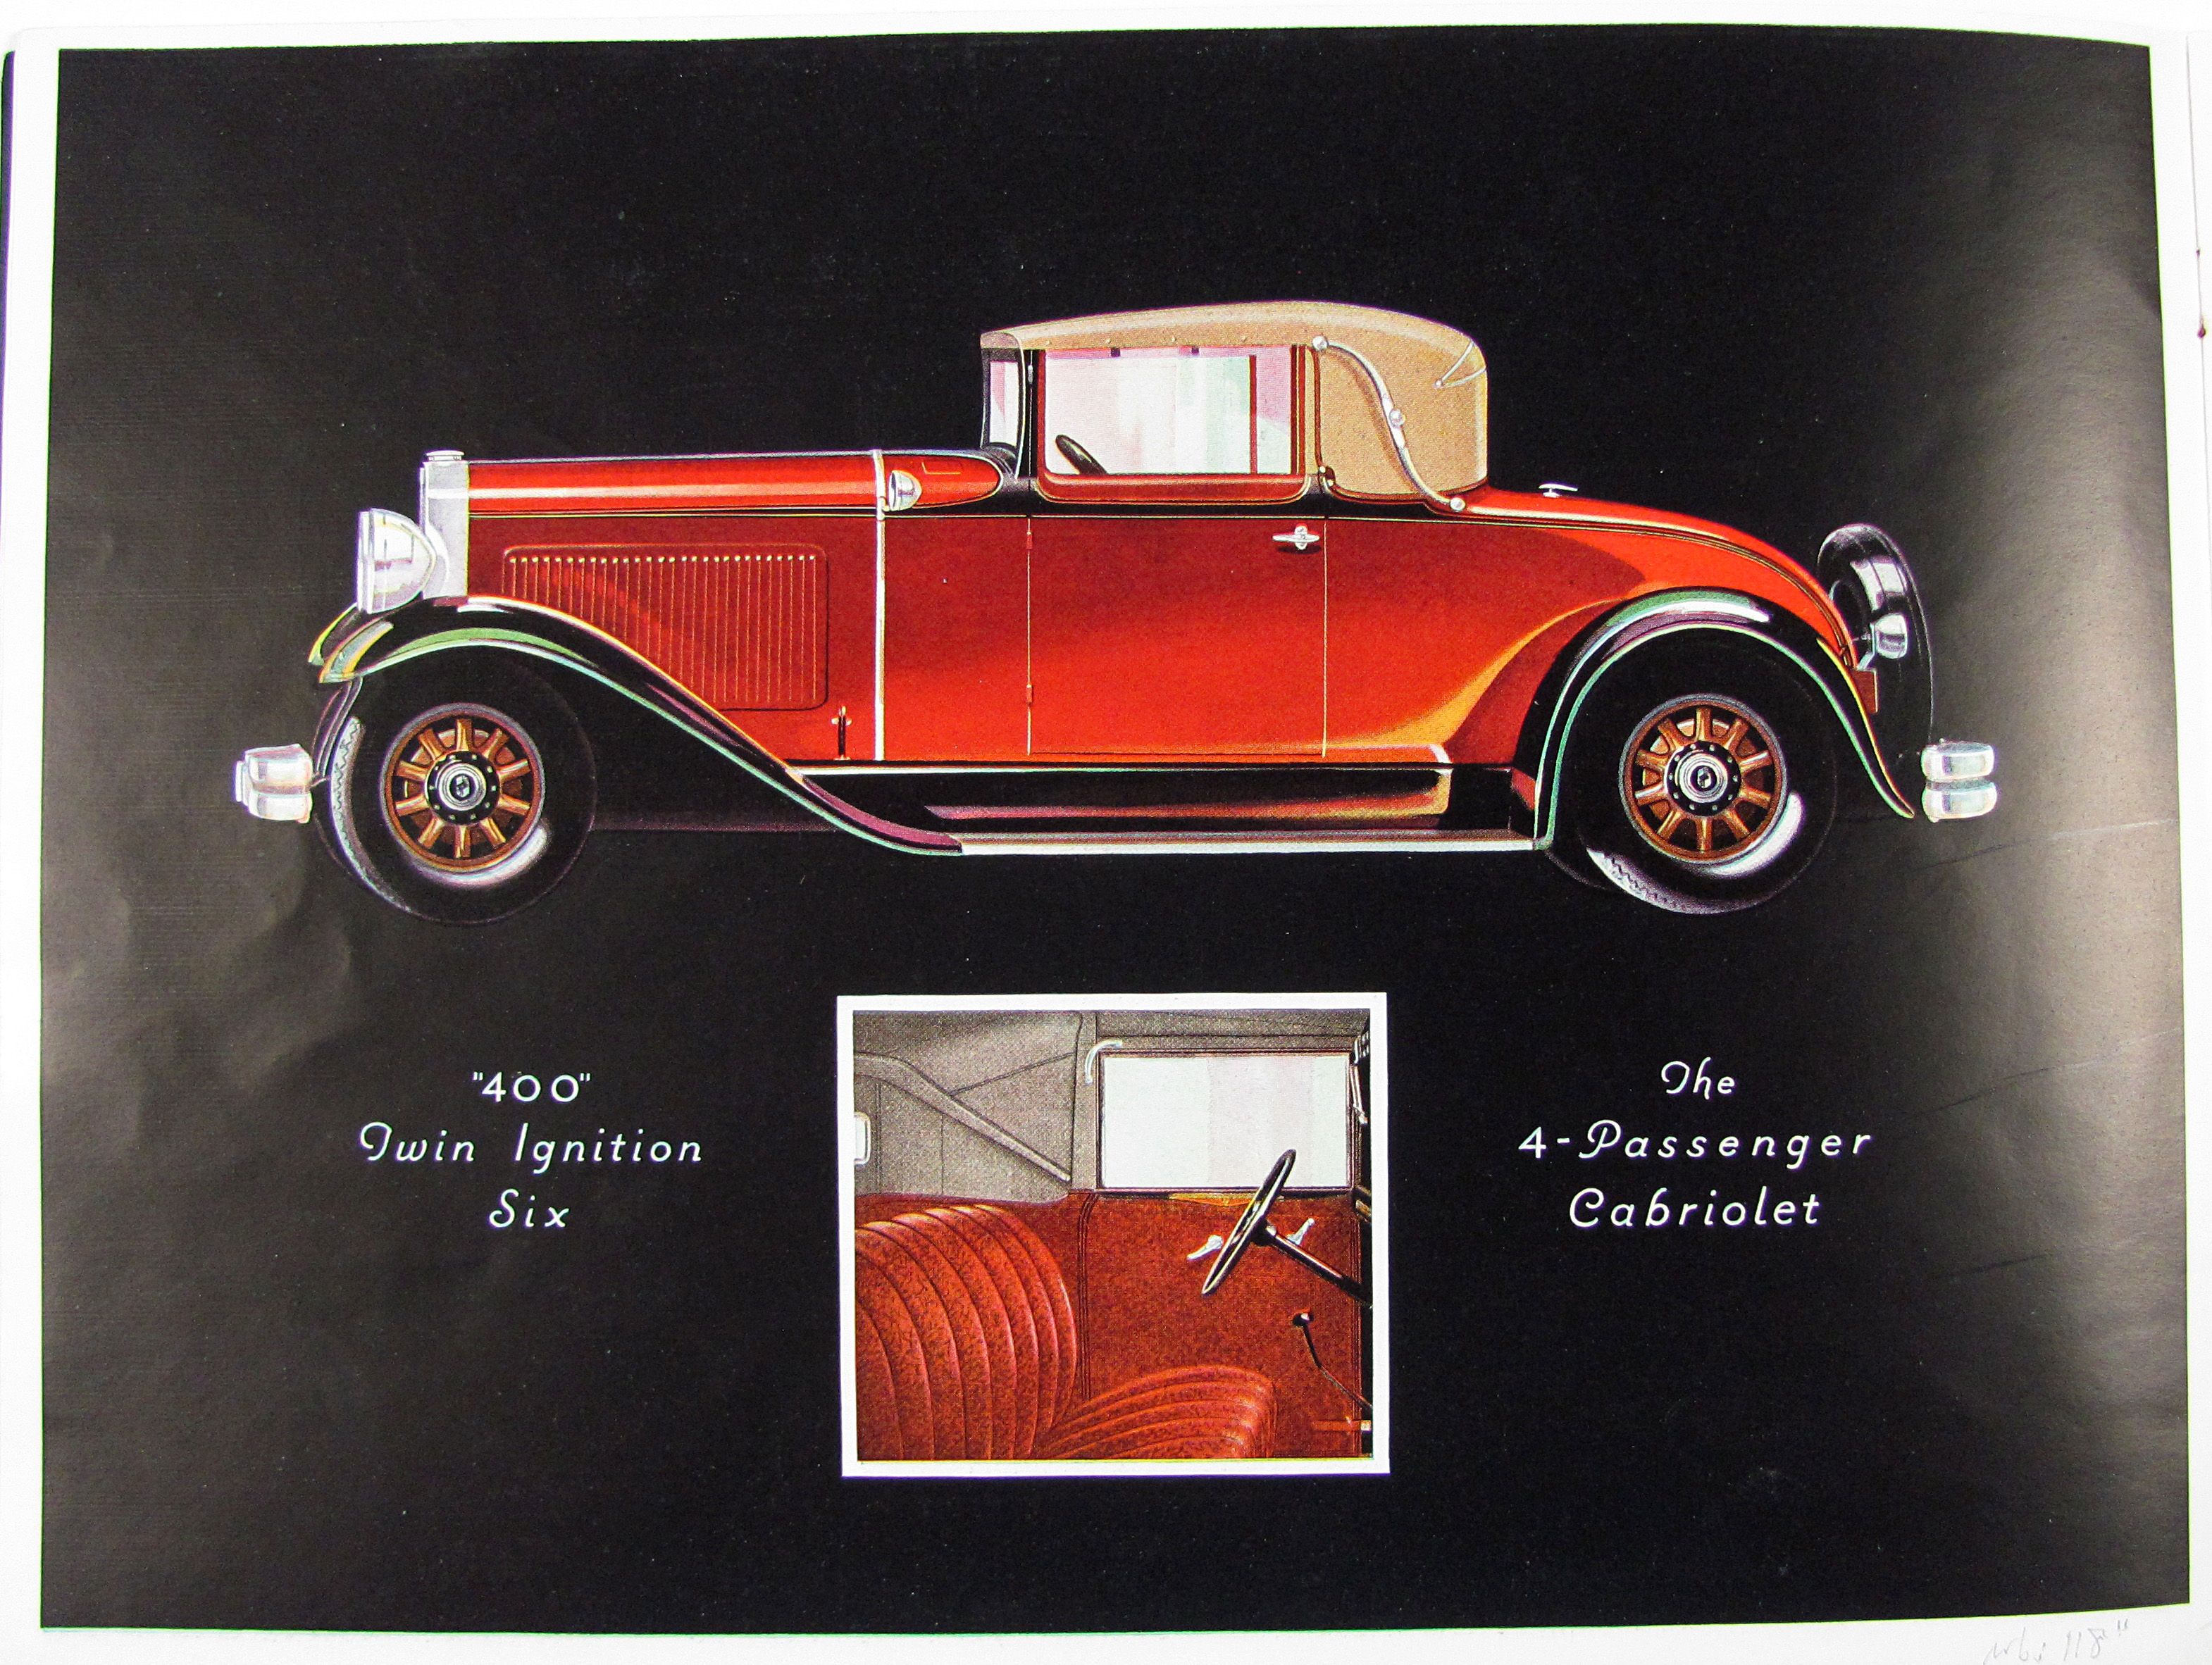 Nash, “400” Series for 1930.  Twin ignintion six and single six models.